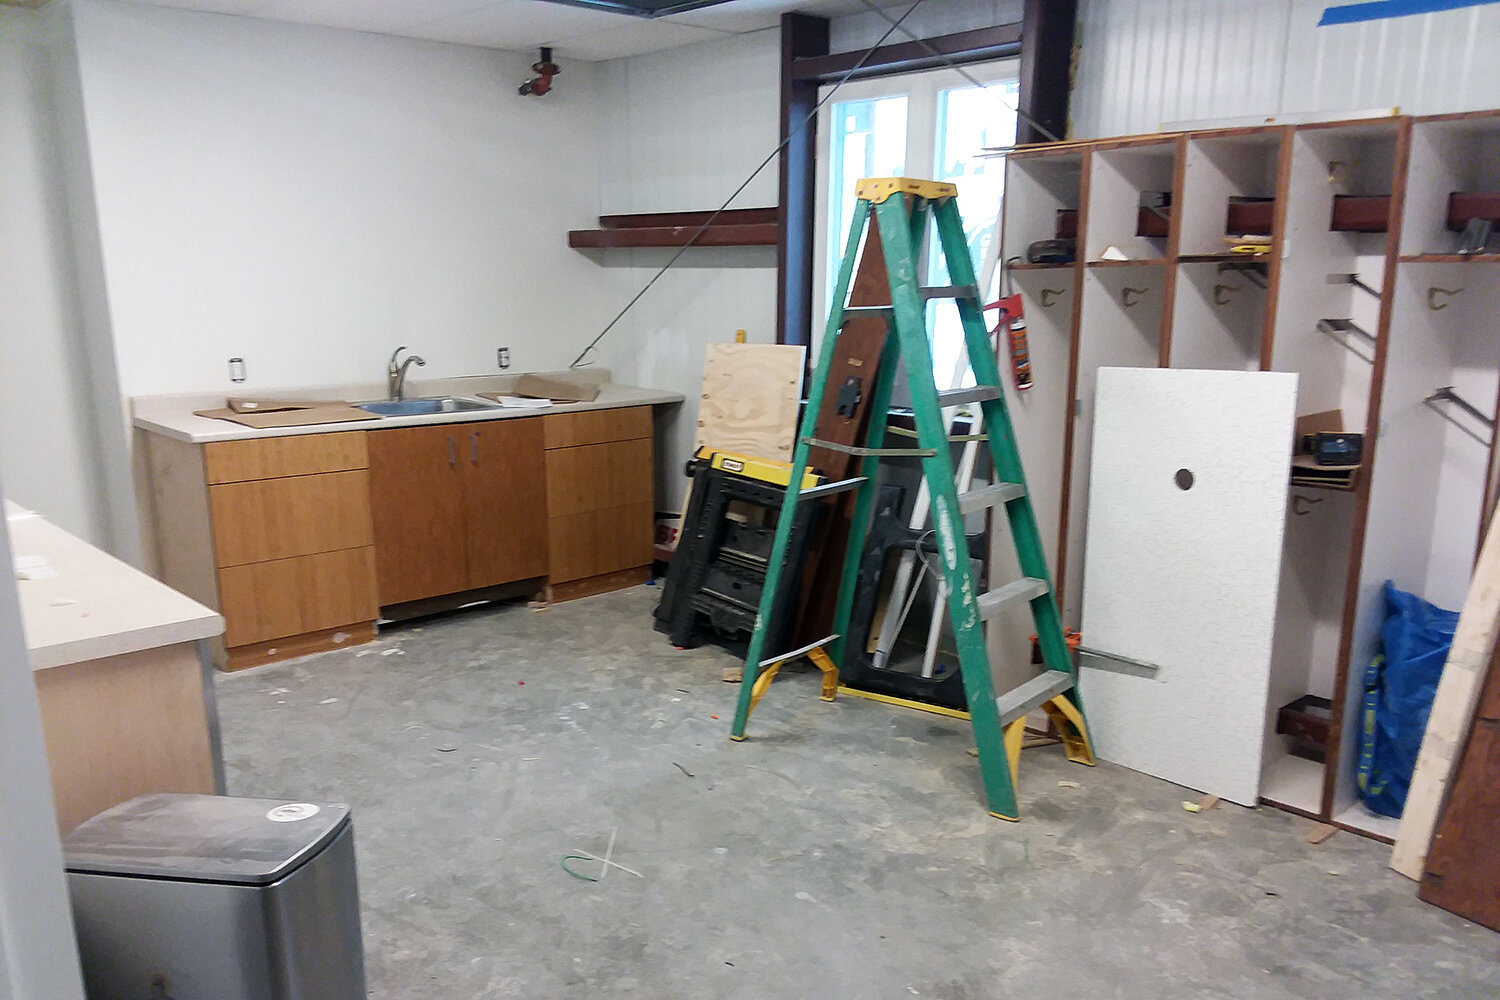 Break room includes donated cabinets and lockers